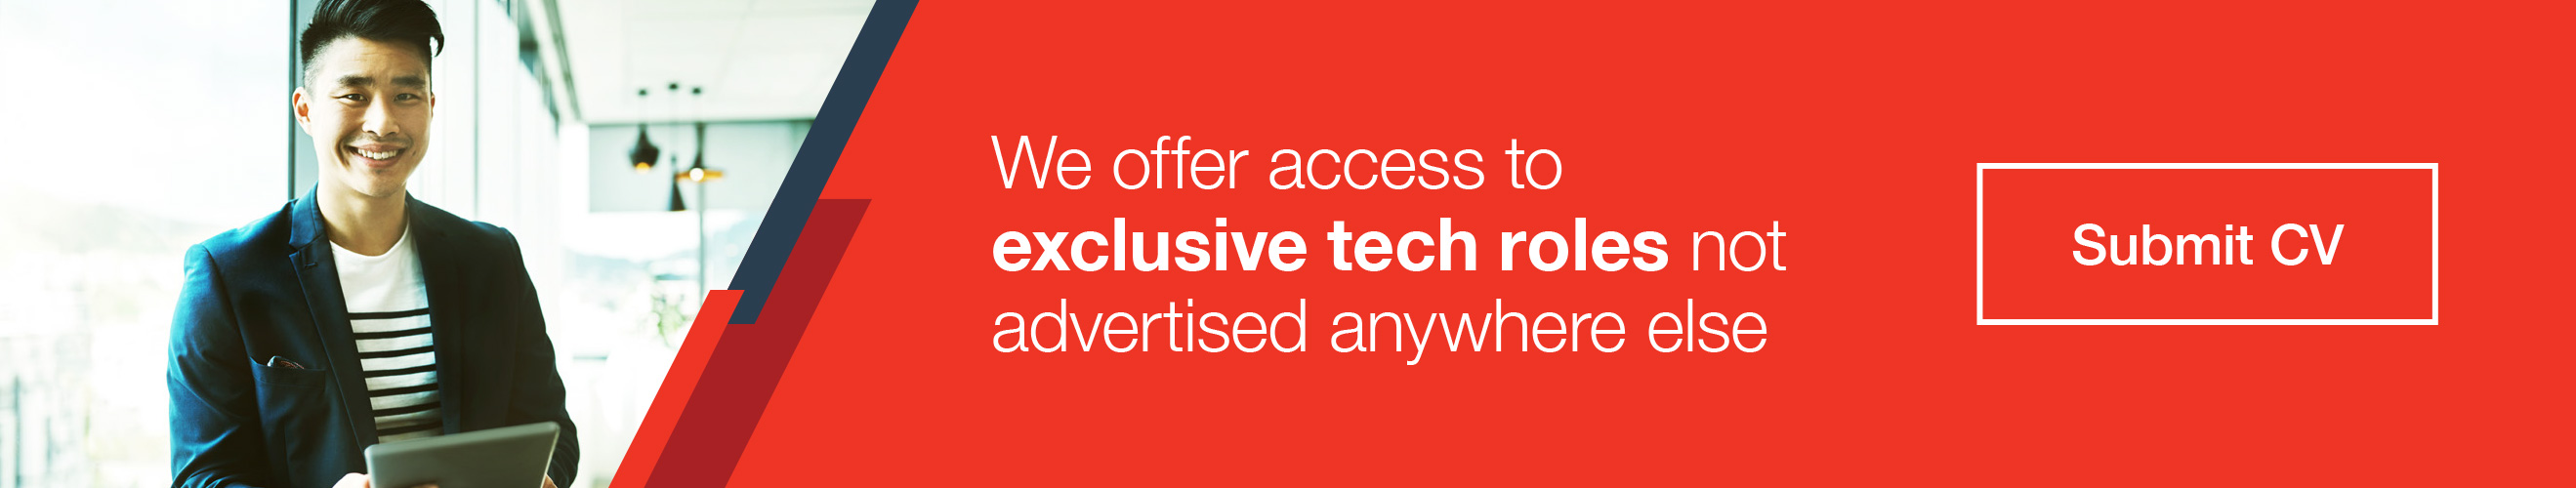 Submit your CV and our recruiters would match you to exclusive tech roles not advertised elsewhere.